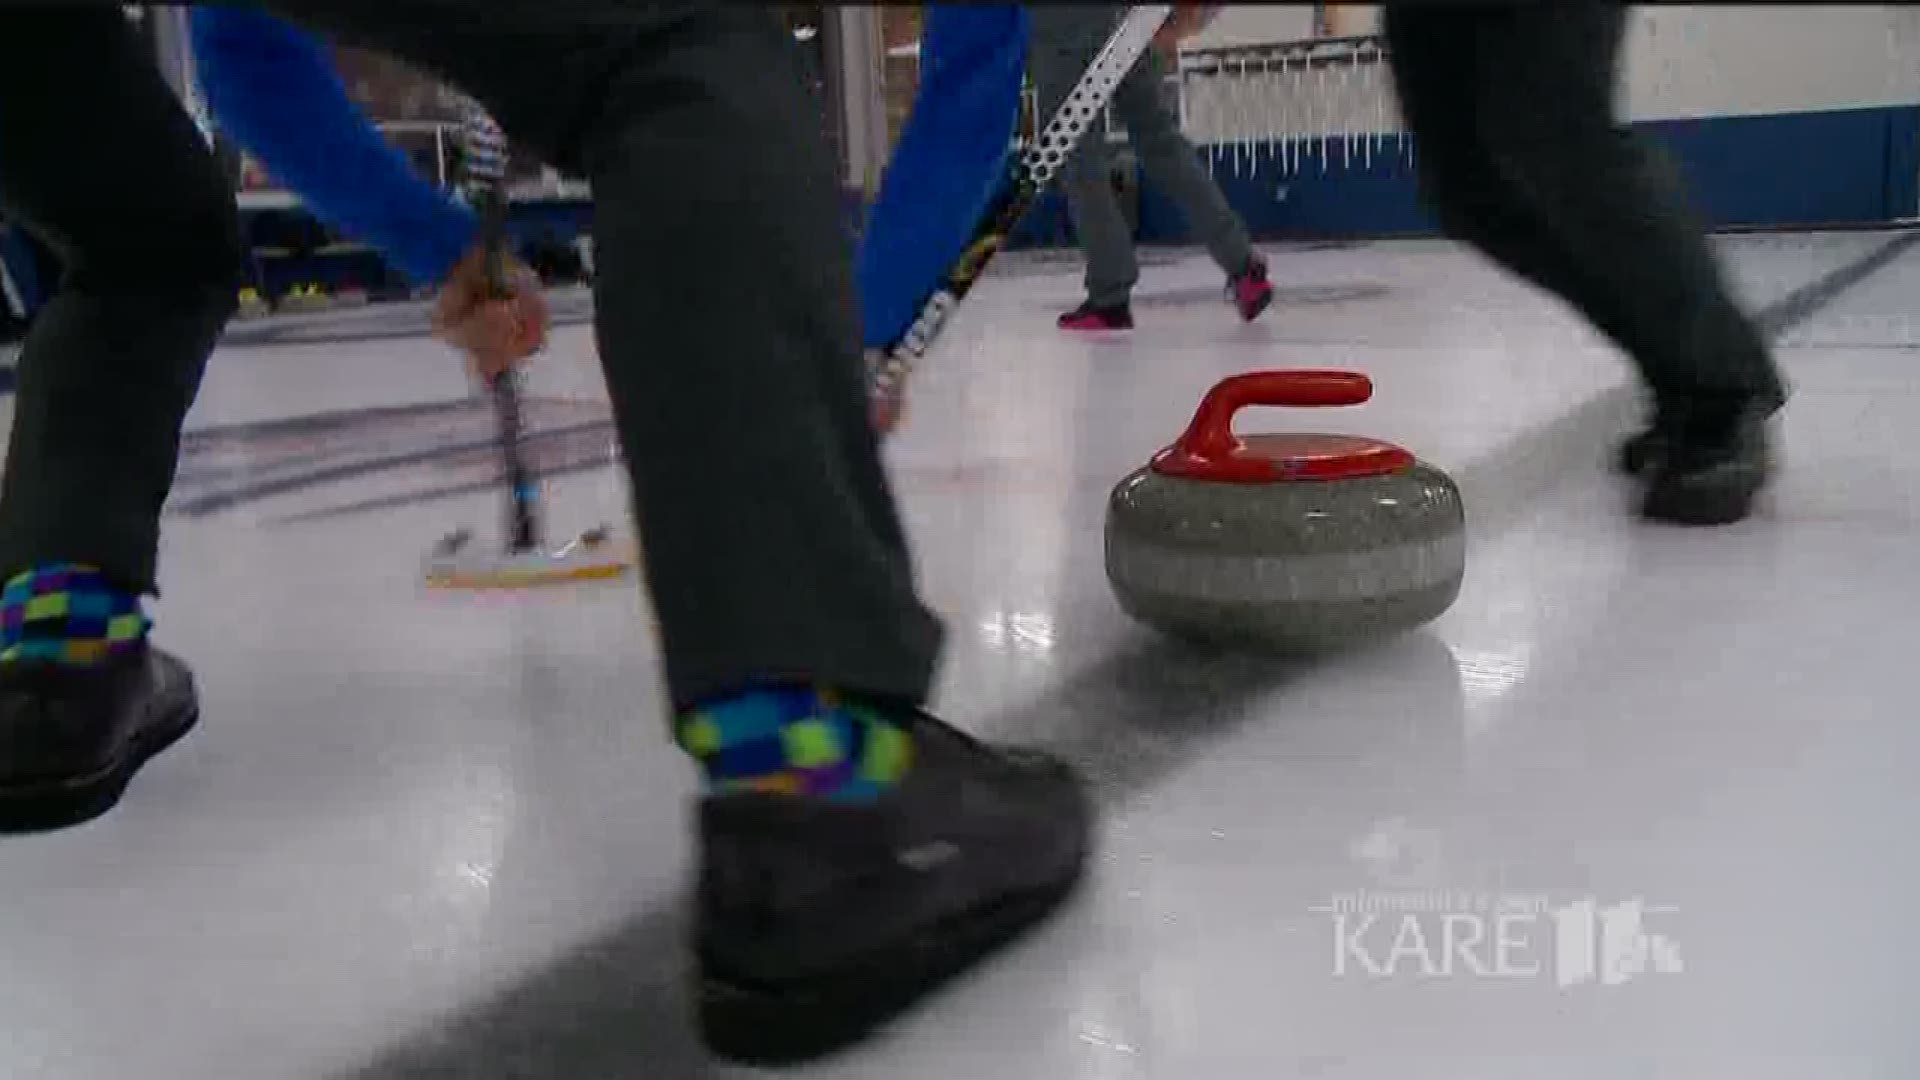 Curling is becoming even more popular in the Twin Cities area, thanks in part to more coverage in the Winter Olympics.